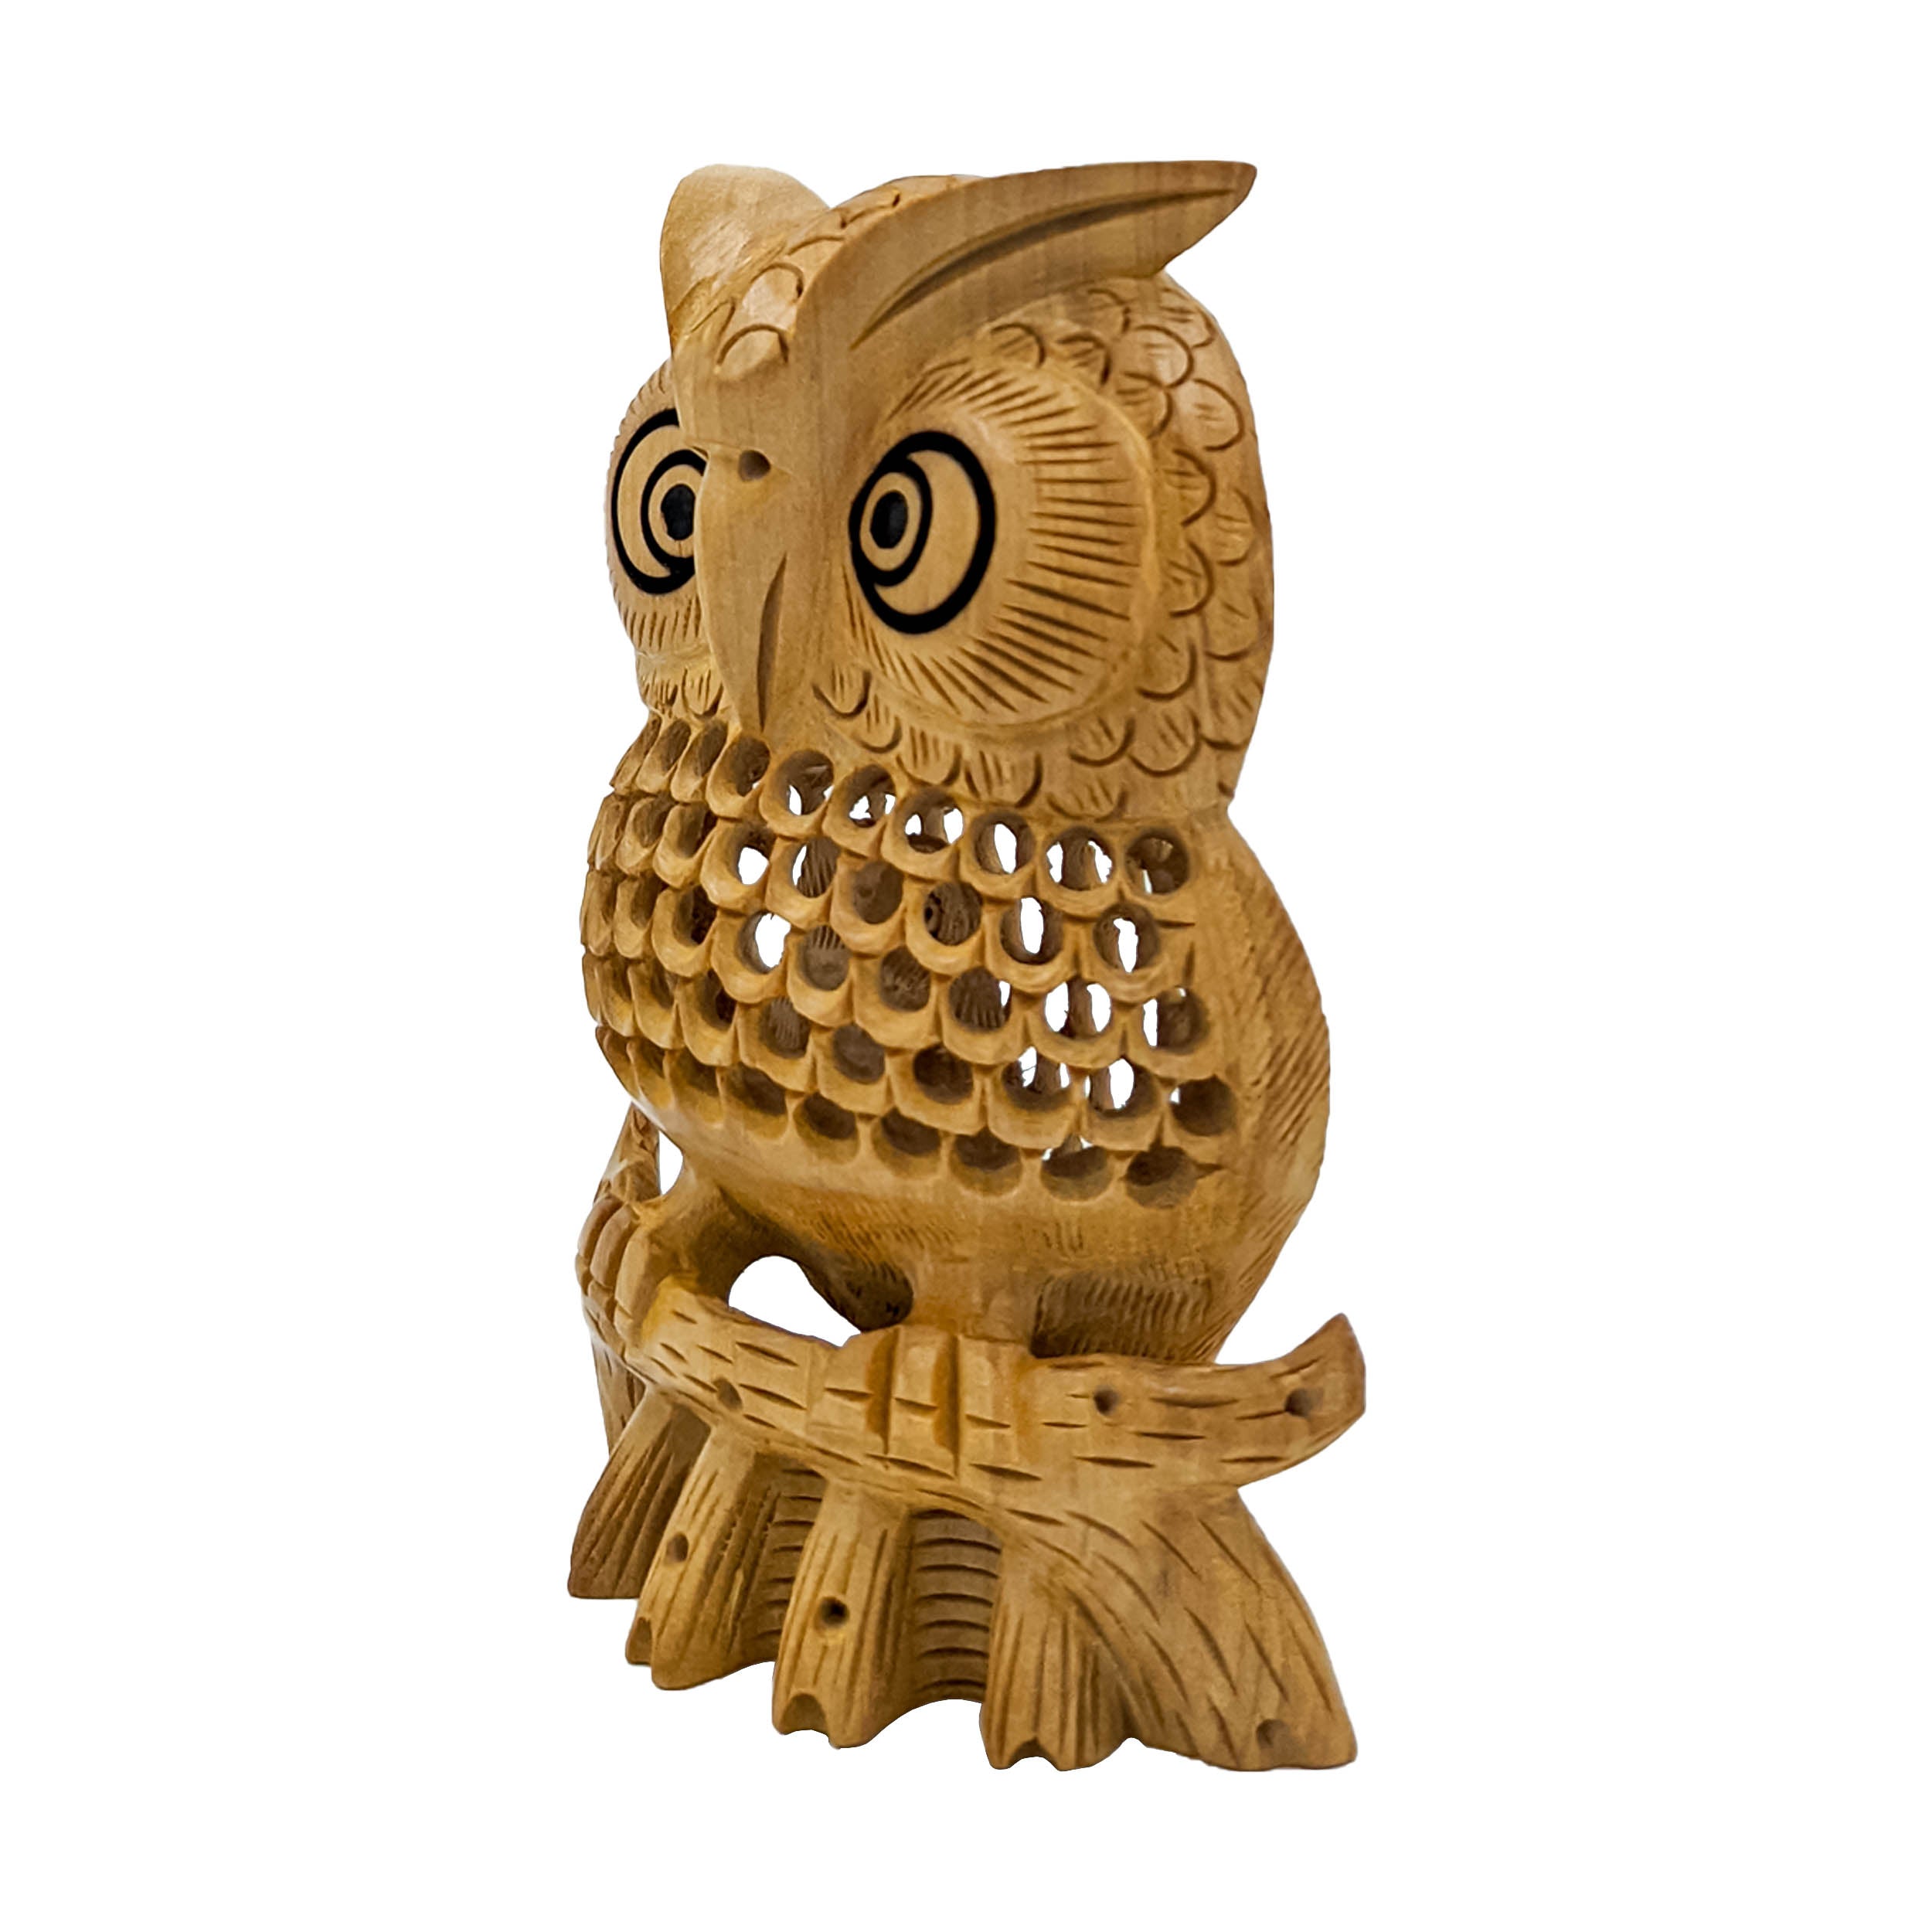 Wooden Handmade Carved Owl Statue For Home And Office Decor (5inch)